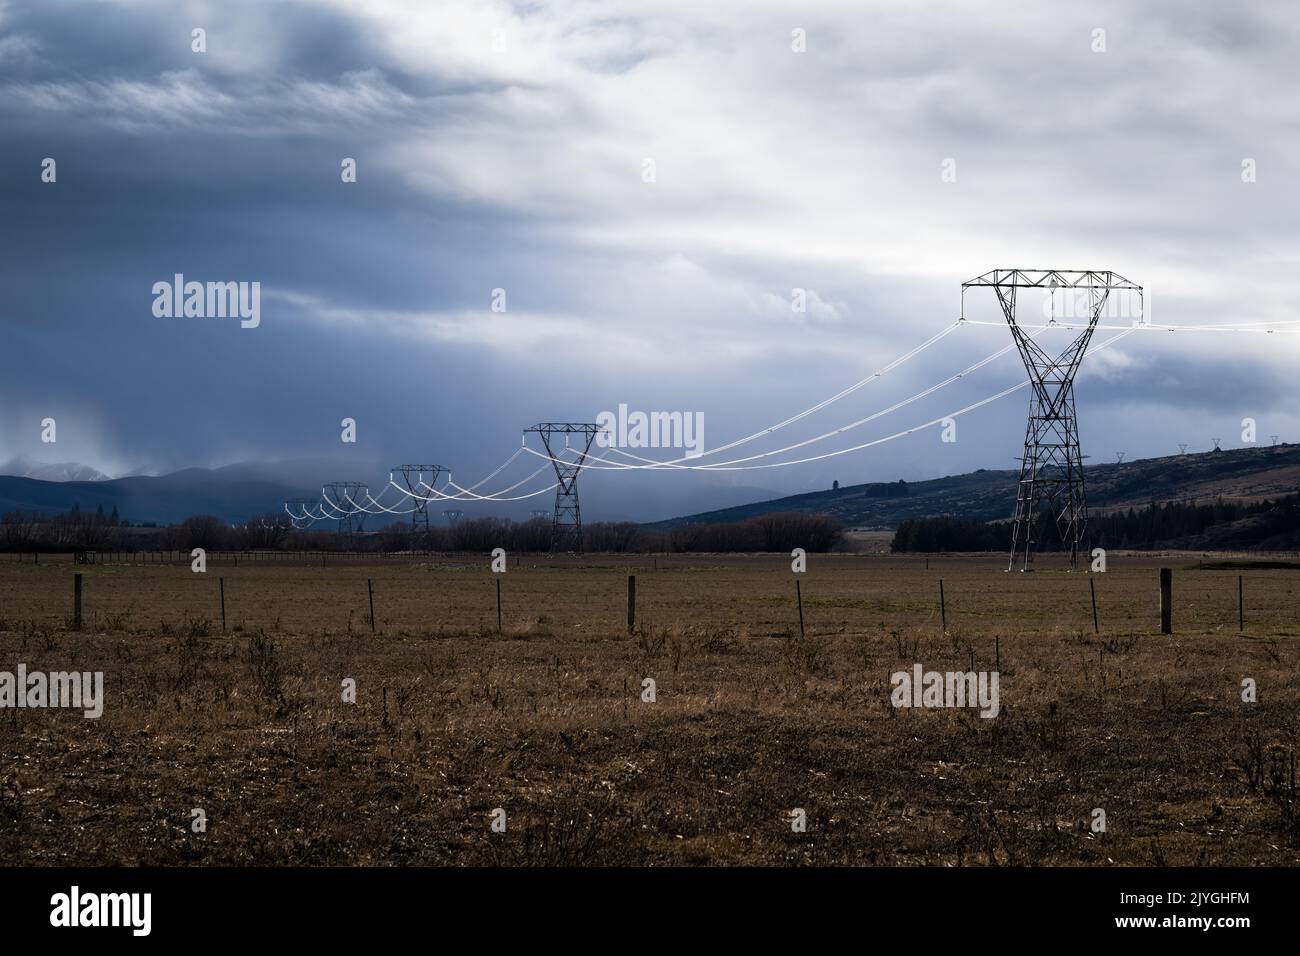 Power lines lit up by the sunlight coming through dark clouds, Central Otago, South Island. Stock Photo